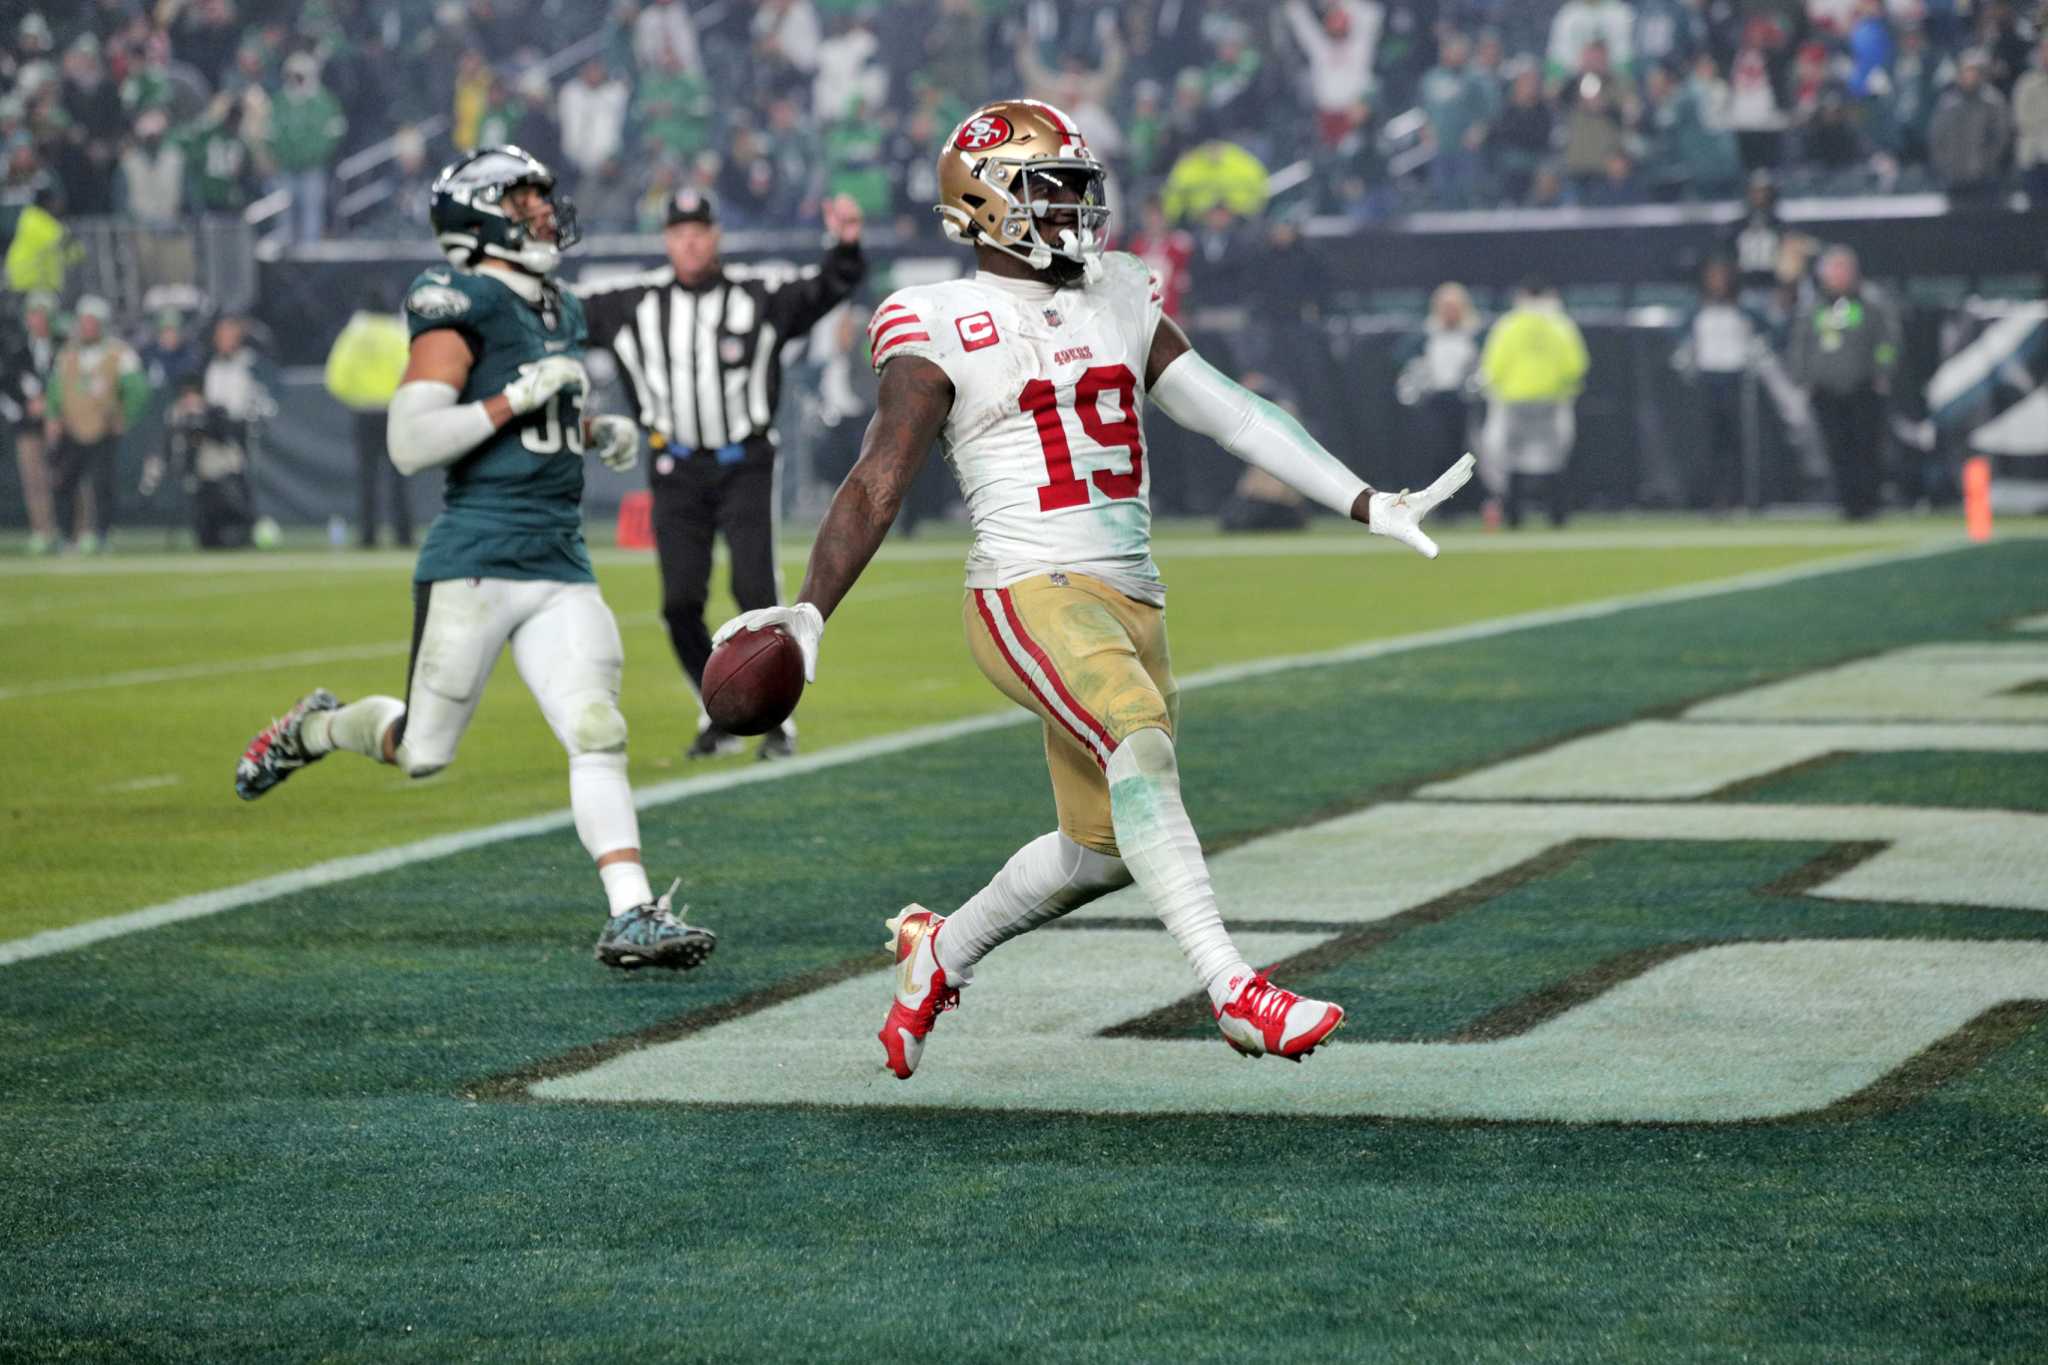 That's just who he is': 49ers' Deebo Samuel trashes Eagles after trash talk